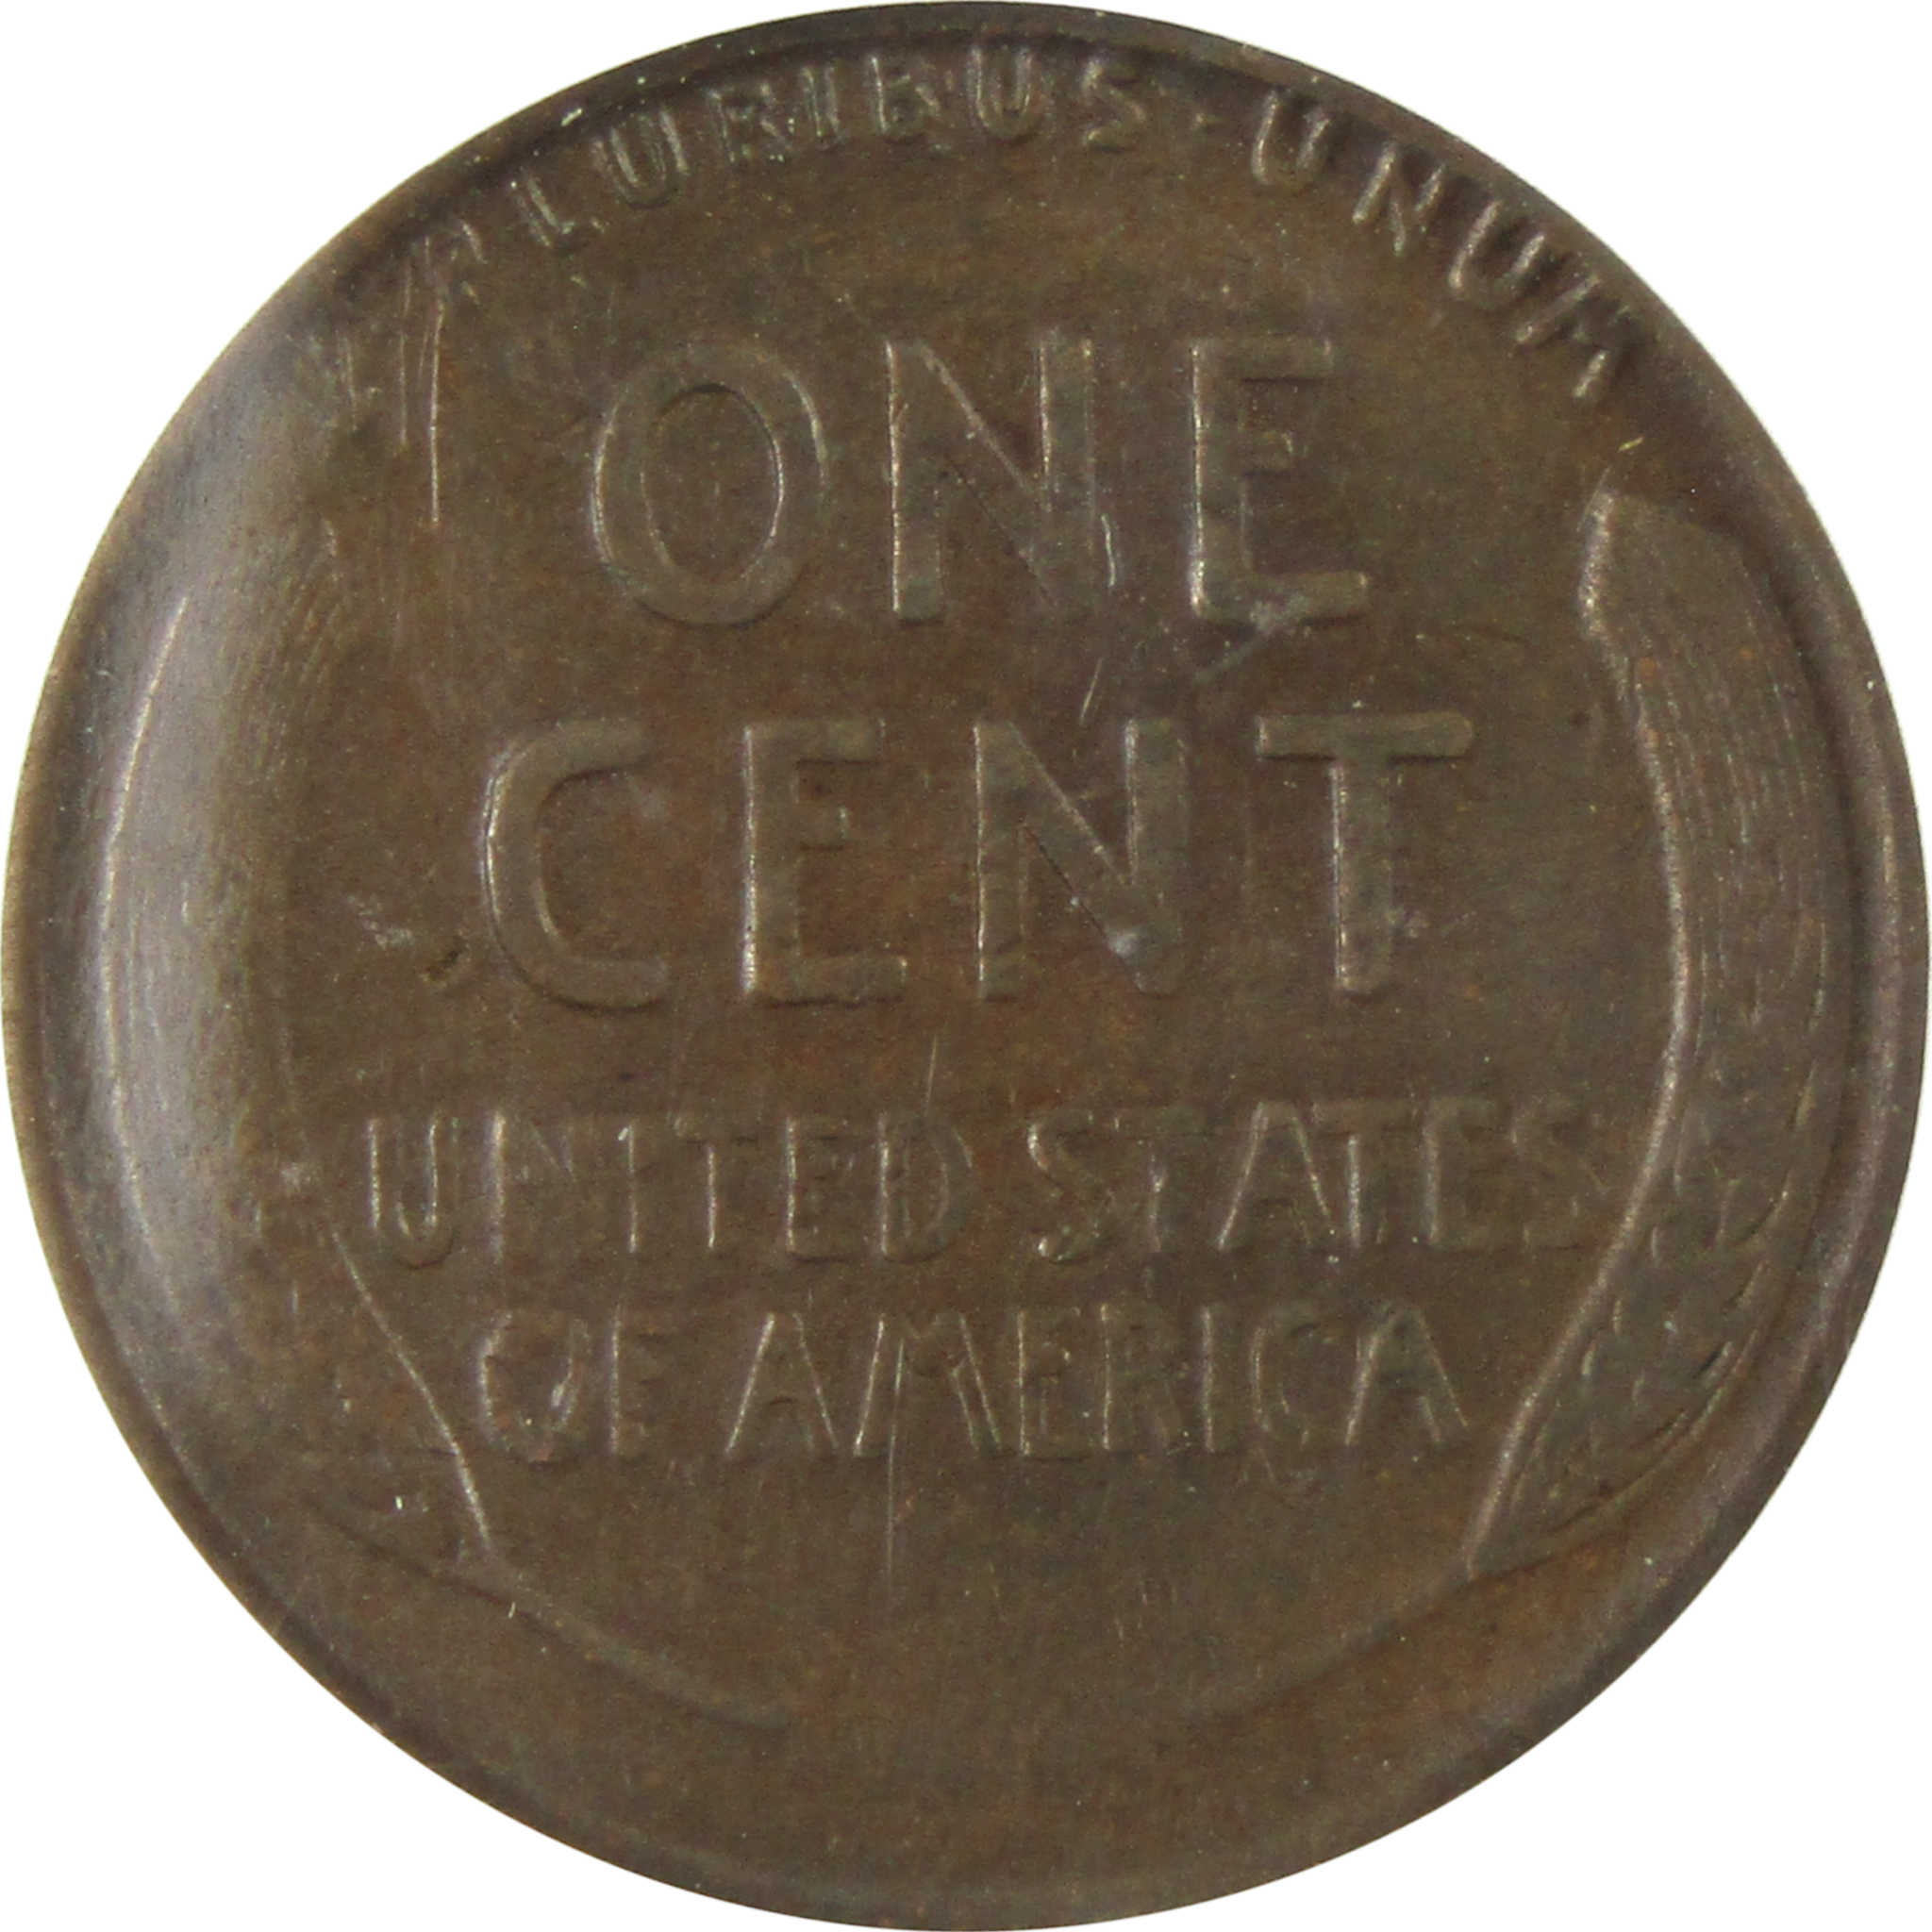 1914 D Lincoln Wheat Cent VF 20 ICG Penny 1c Coin SKU:I13699